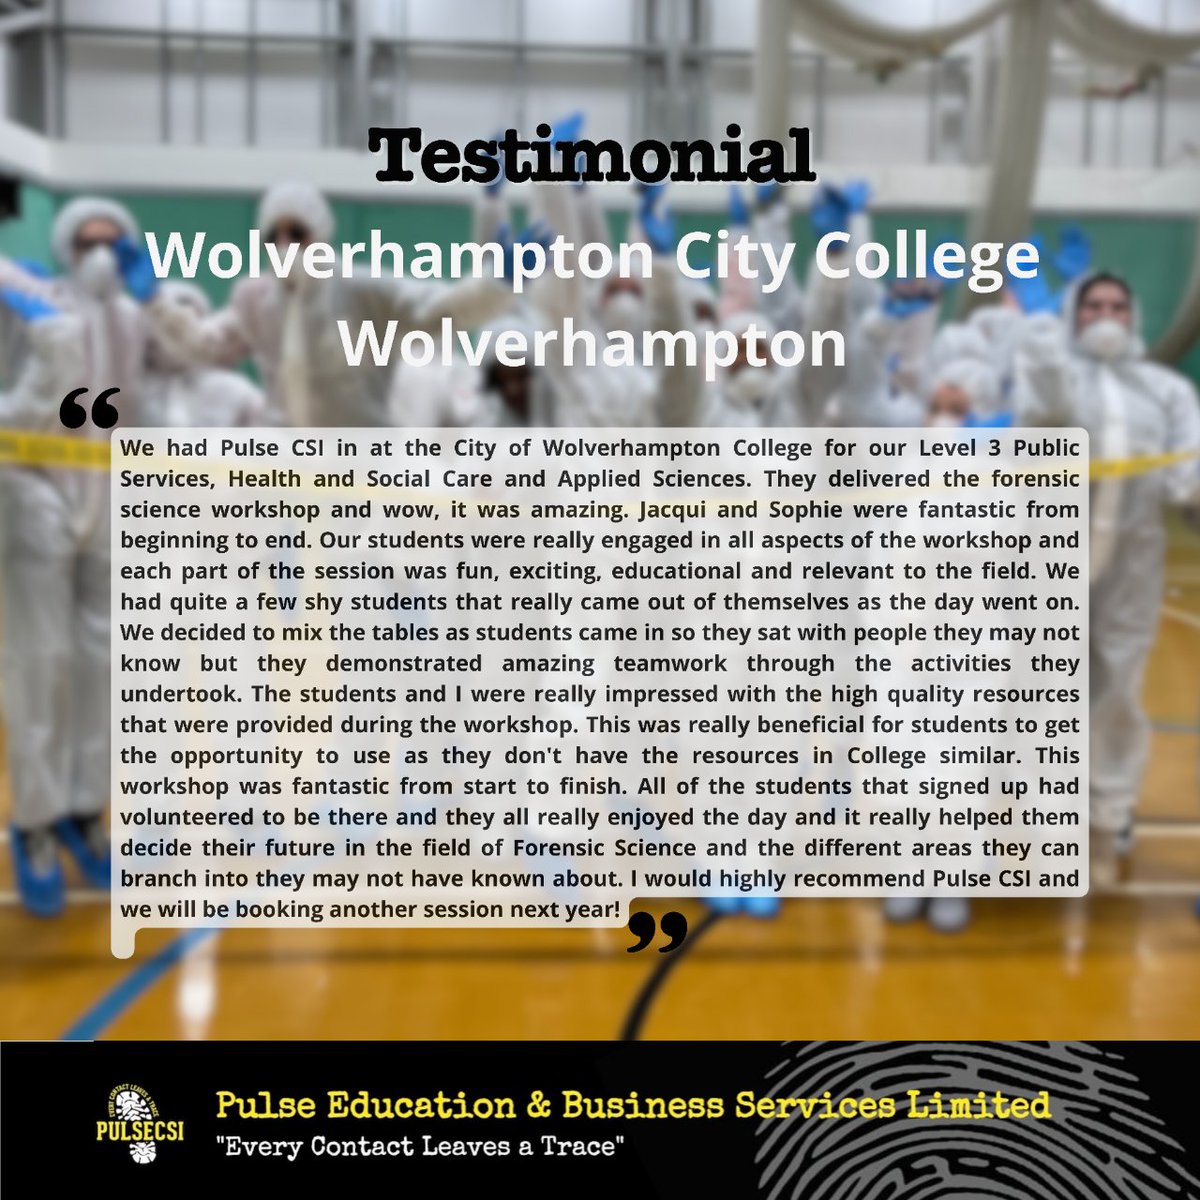 Another great testimonial received from the City of Wolverhampton College
#cityofwolverhamptoncollege #teachersfollowteachers #publicservices #forensicscience #testimonials #officeforstudents #wolvcoll